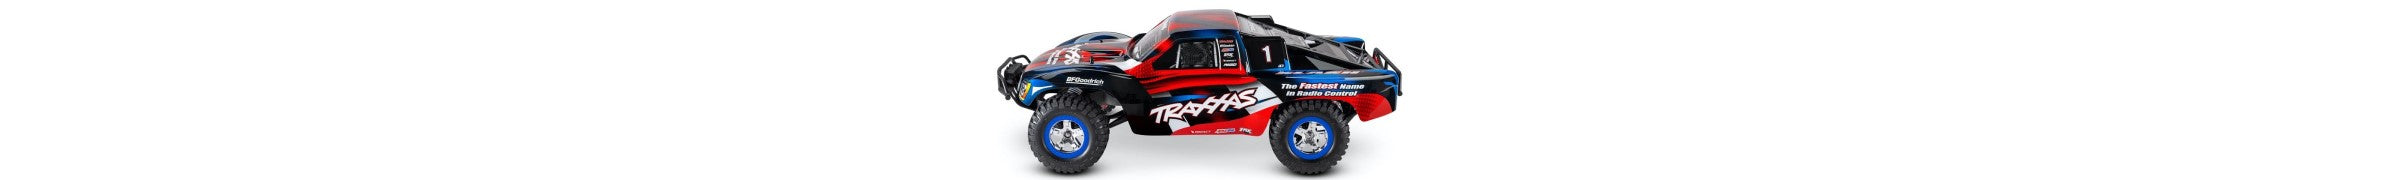 Parts For 58034-61 Traxxas Slash 1/10 XL-5 2WD RC Short Course Truck with LED Lighting